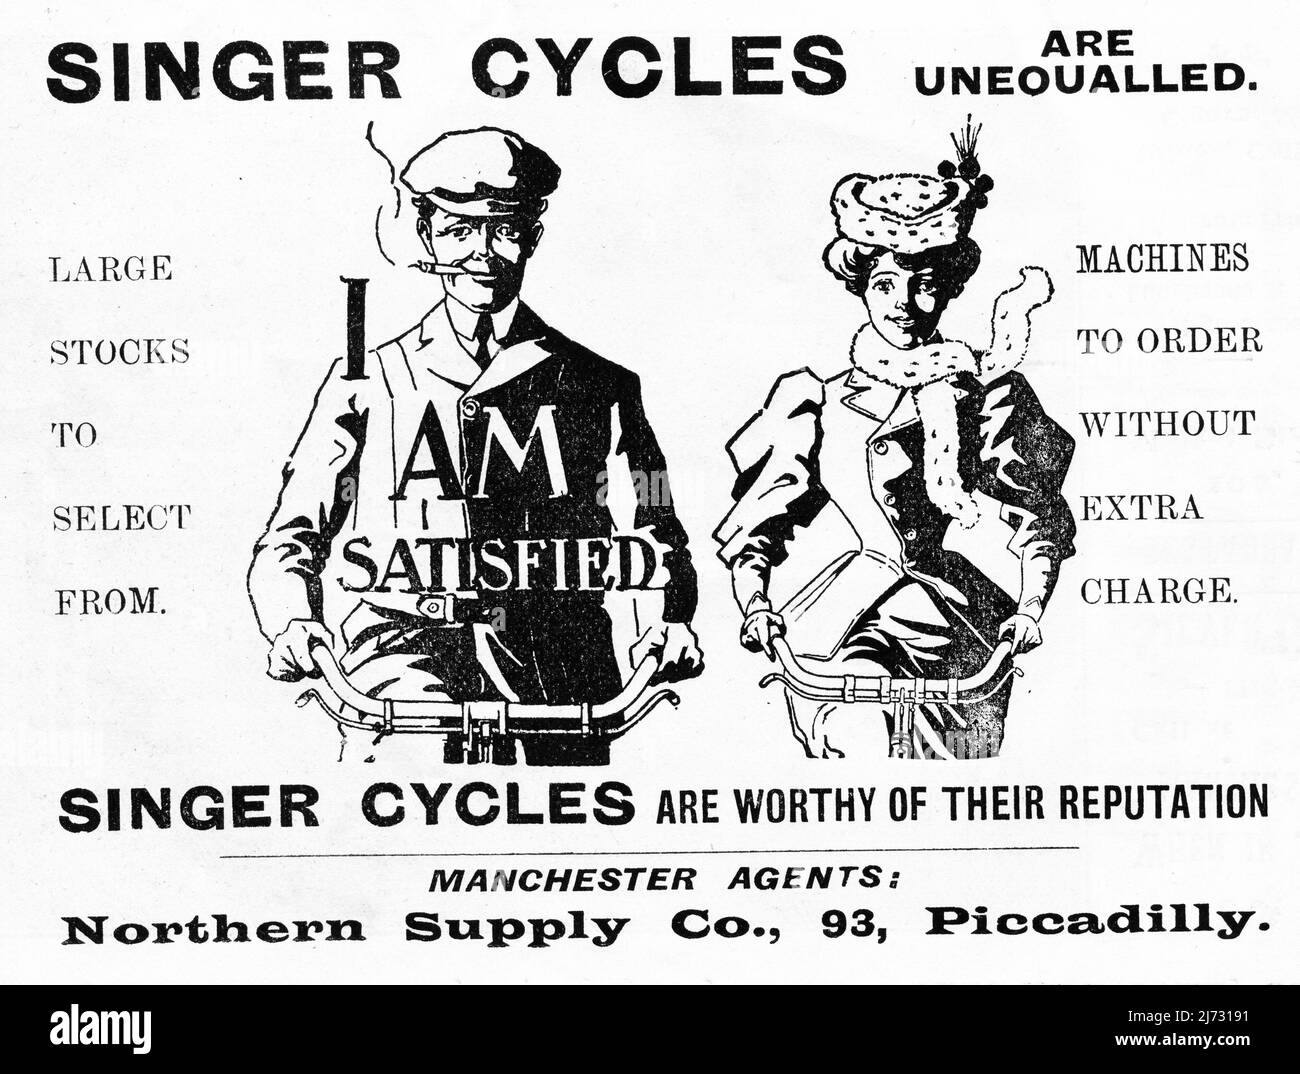 A 1906 advertisement promoting Singer Cycles, by their agents, ‘Northern Supply Co., 93 Piccadilly, Manchester. The advert depicts lady and gentleman cyclists with the slogans, “I am Satisfied”, “Singer Cycles are Unequalled” and “Singer Cycles are Worthy of their Reputation”. Stock Photo